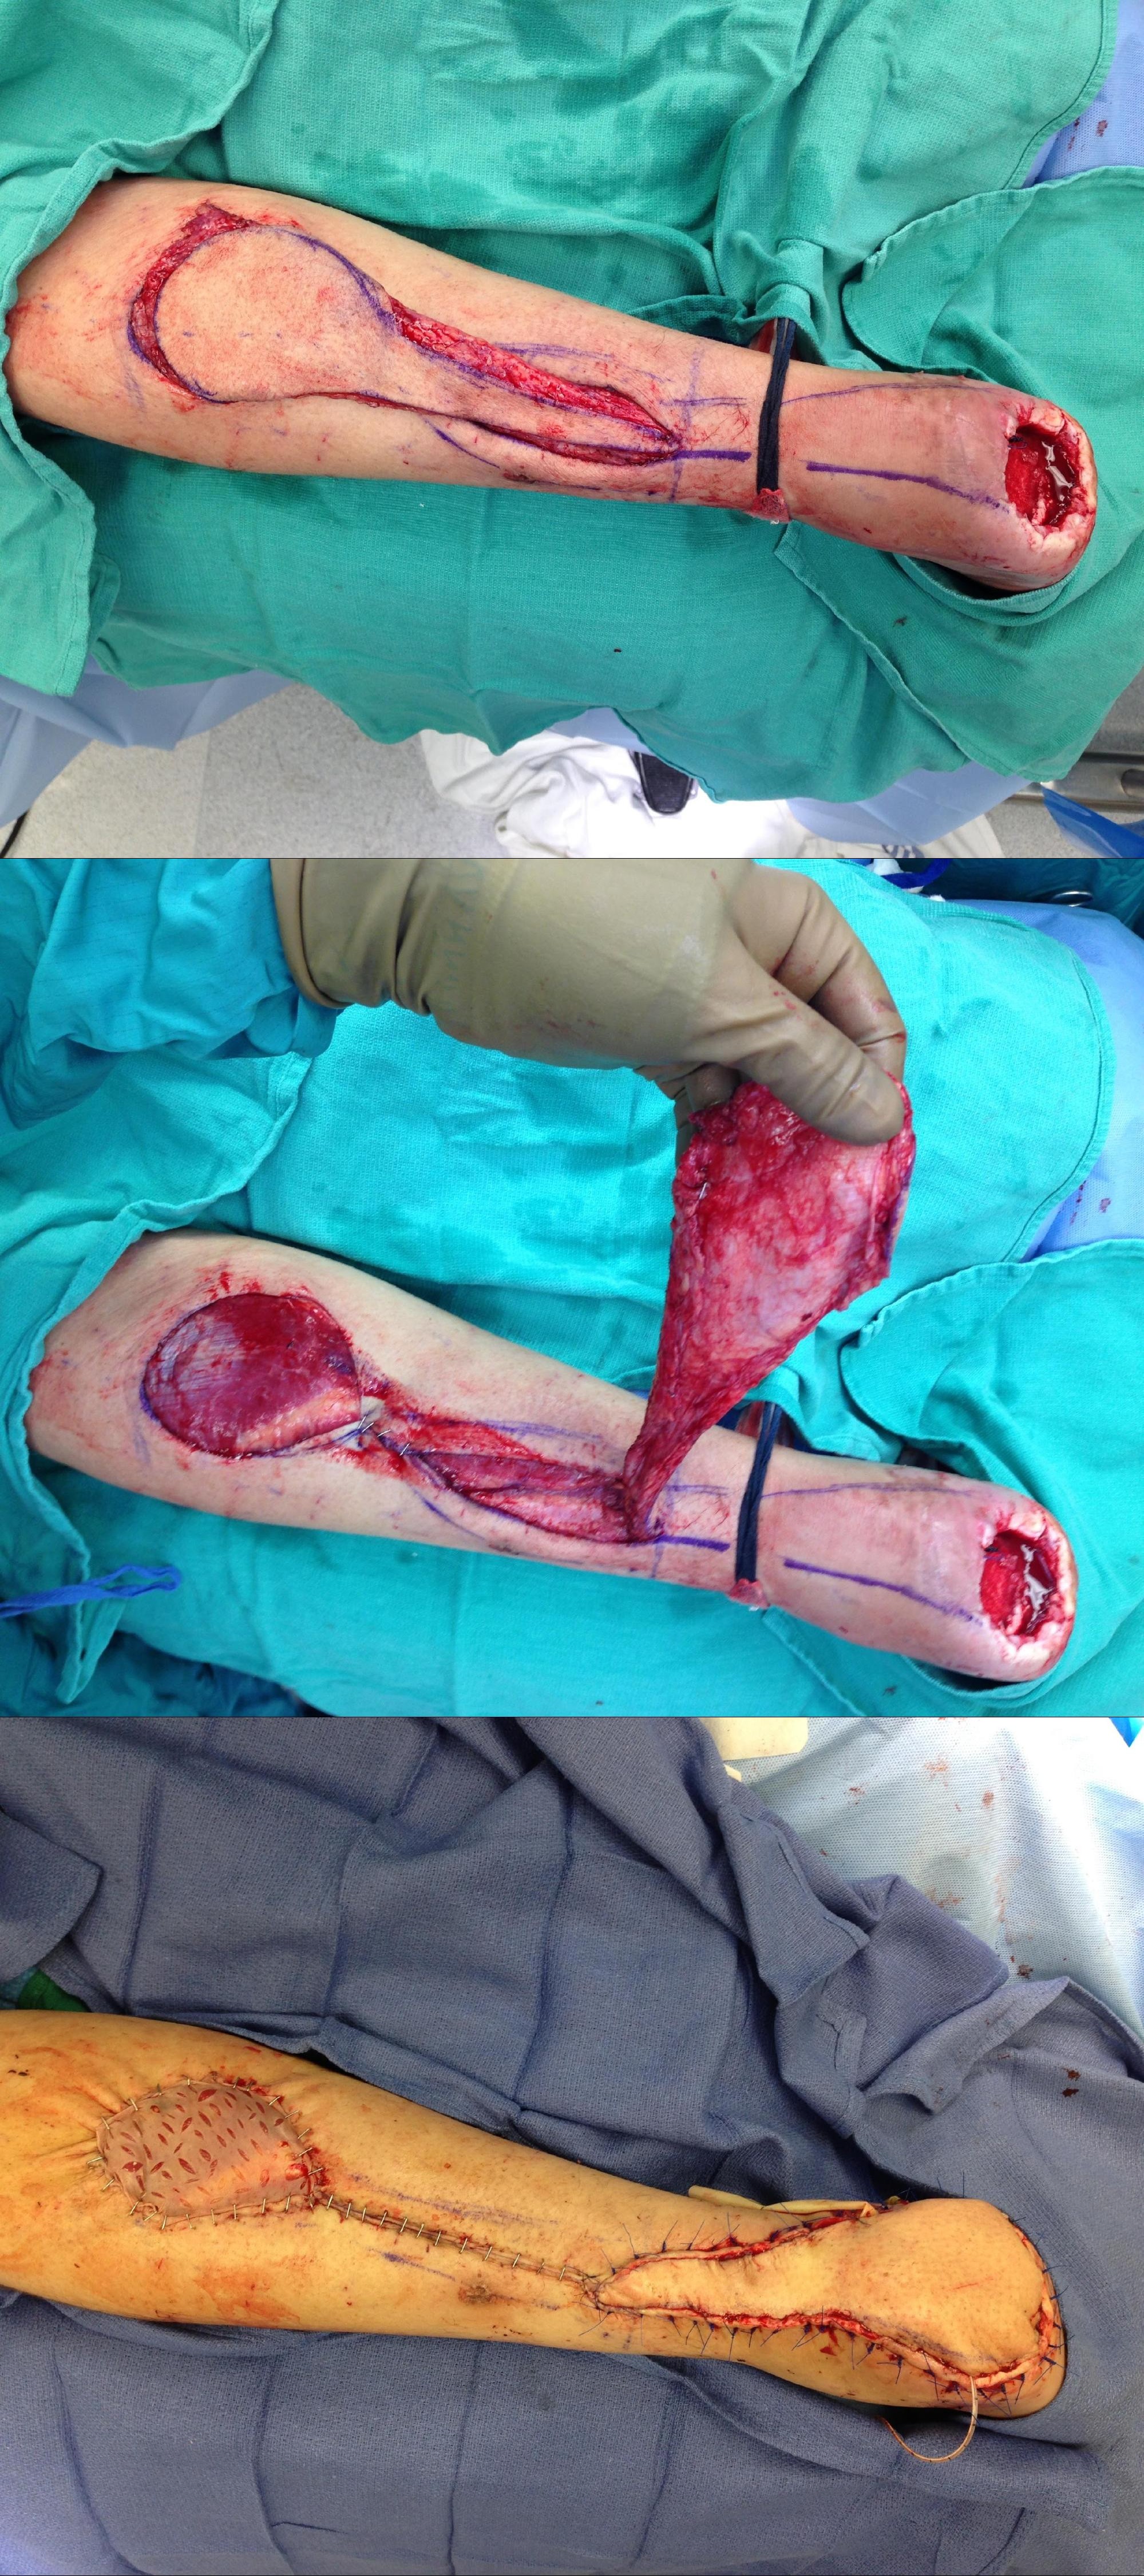 Rotation Flap
Reverse Sural Artery Flap for reconstruction of non-healing heel ulcer.